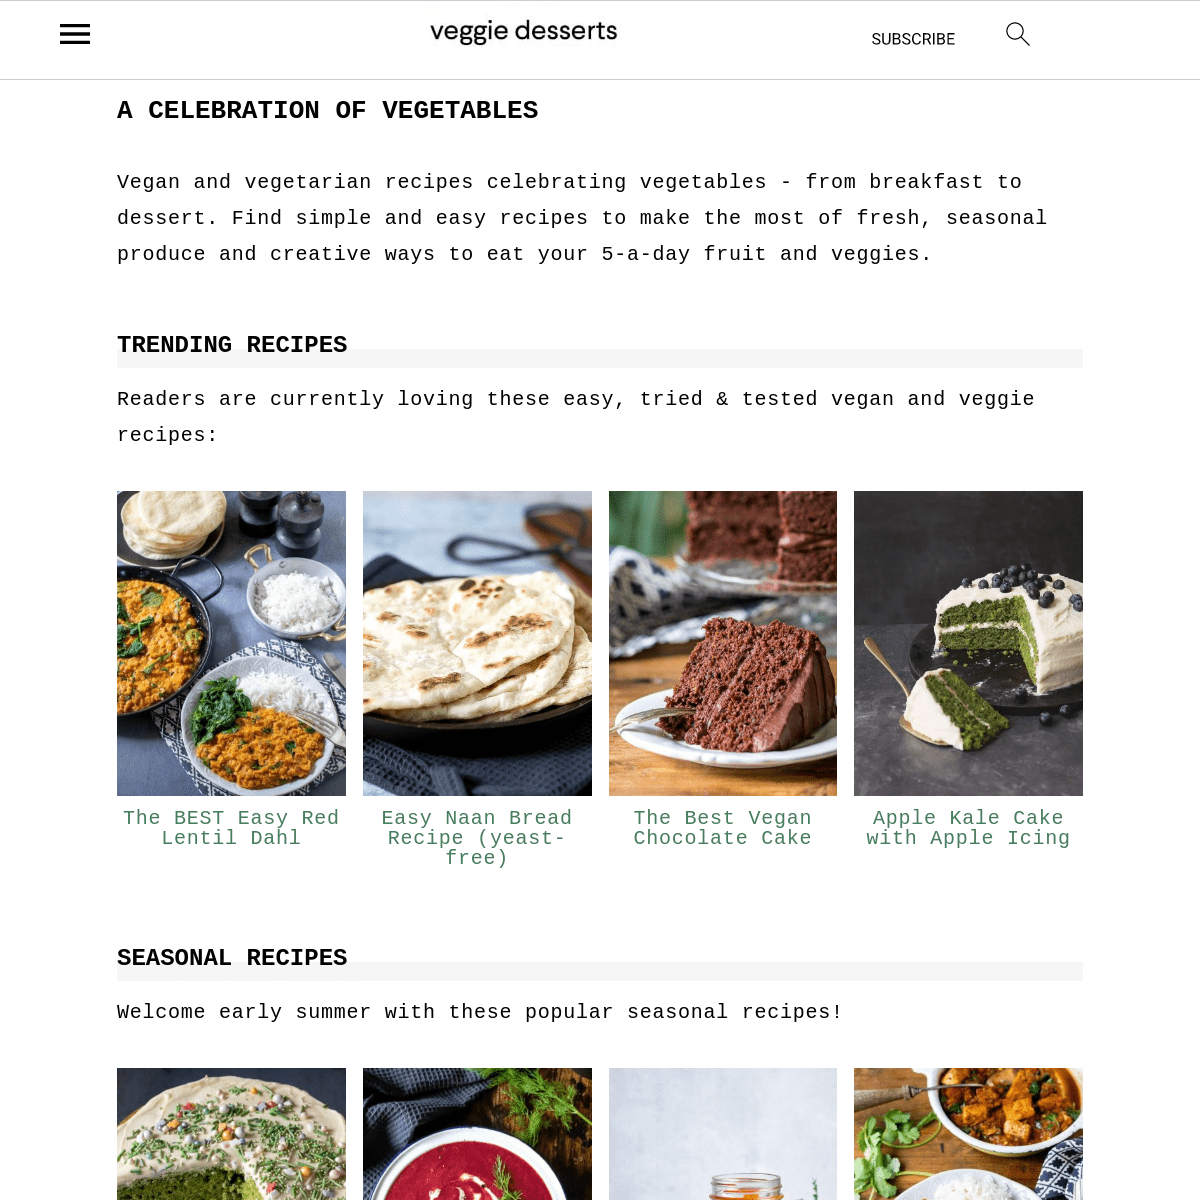 A complete backup of https://veggiedesserts.com